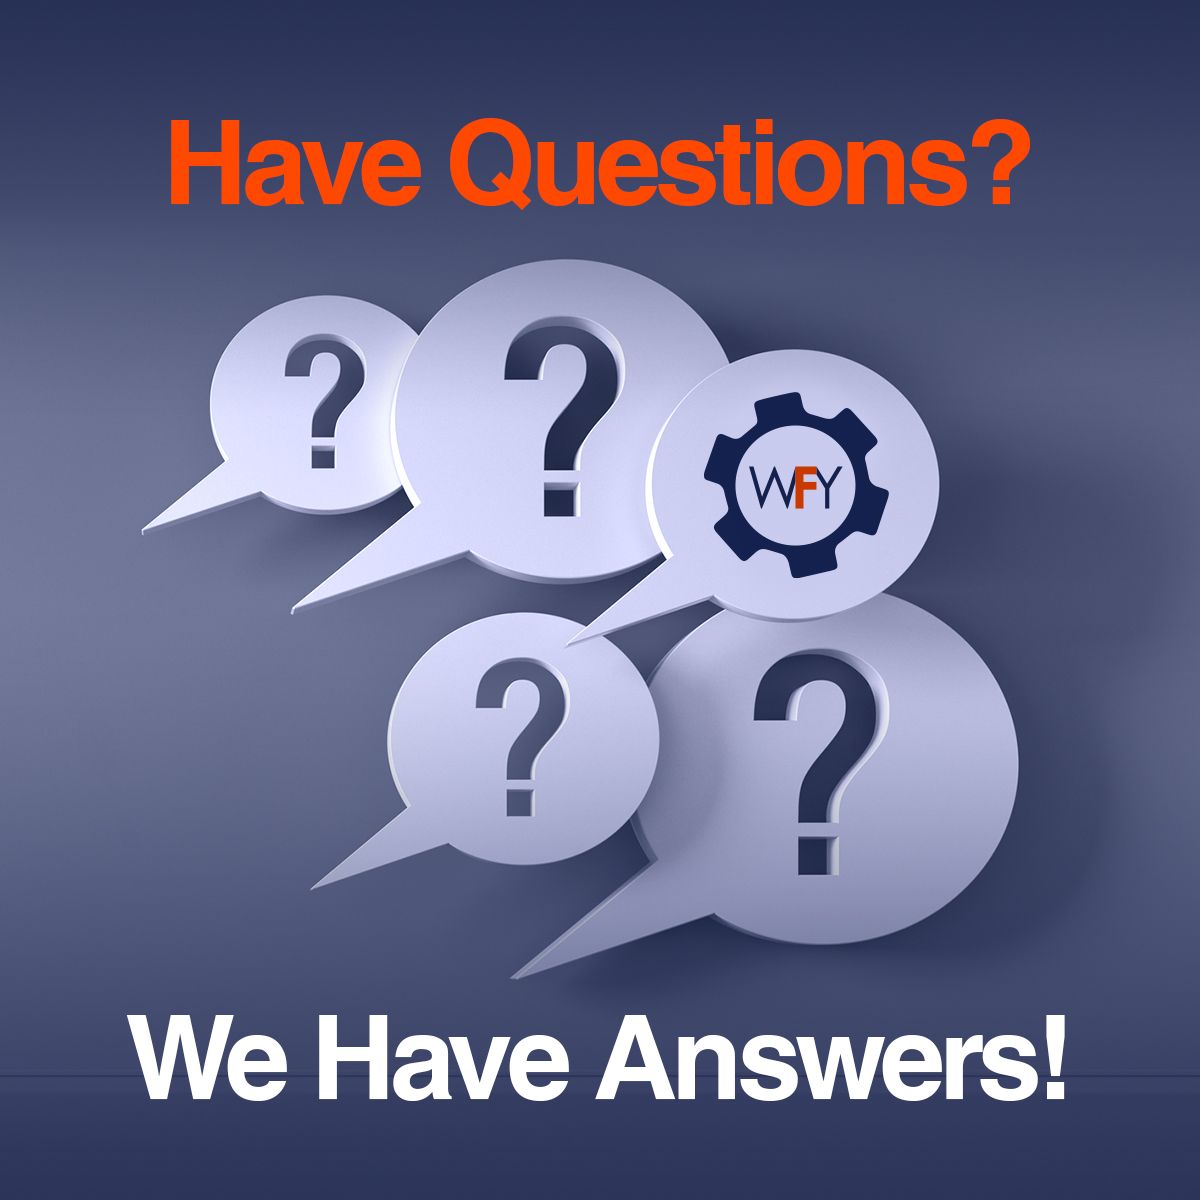 Have Questions? We Have Answers!